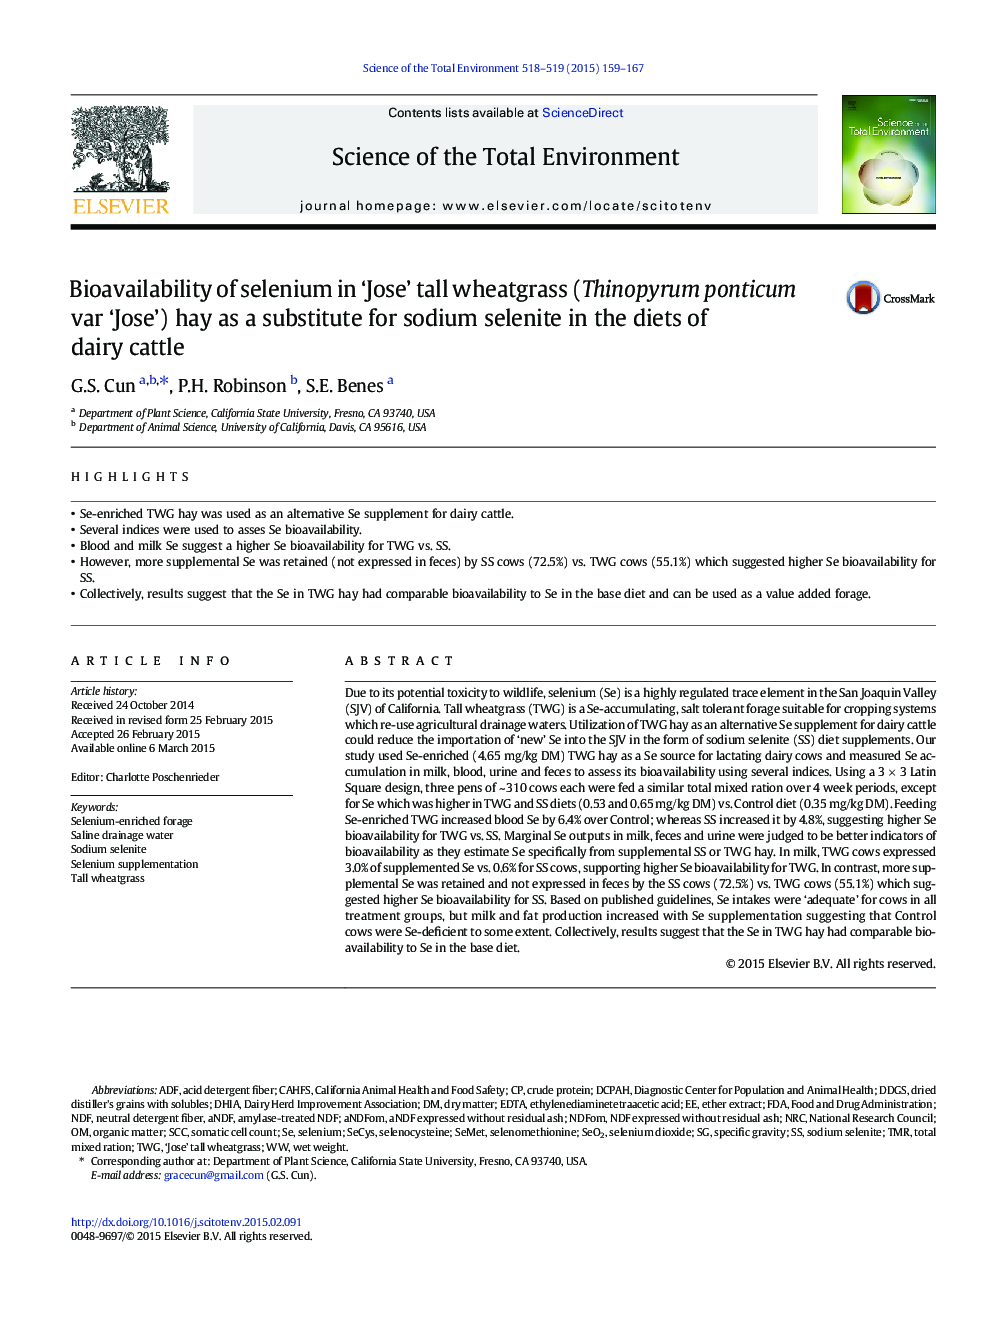 Bioavailability of selenium in 'Jose' tall wheatgrass (Thinopyrum ponticum var 'Jose') hay as a substitute for sodium selenite in the diets of dairy cattle